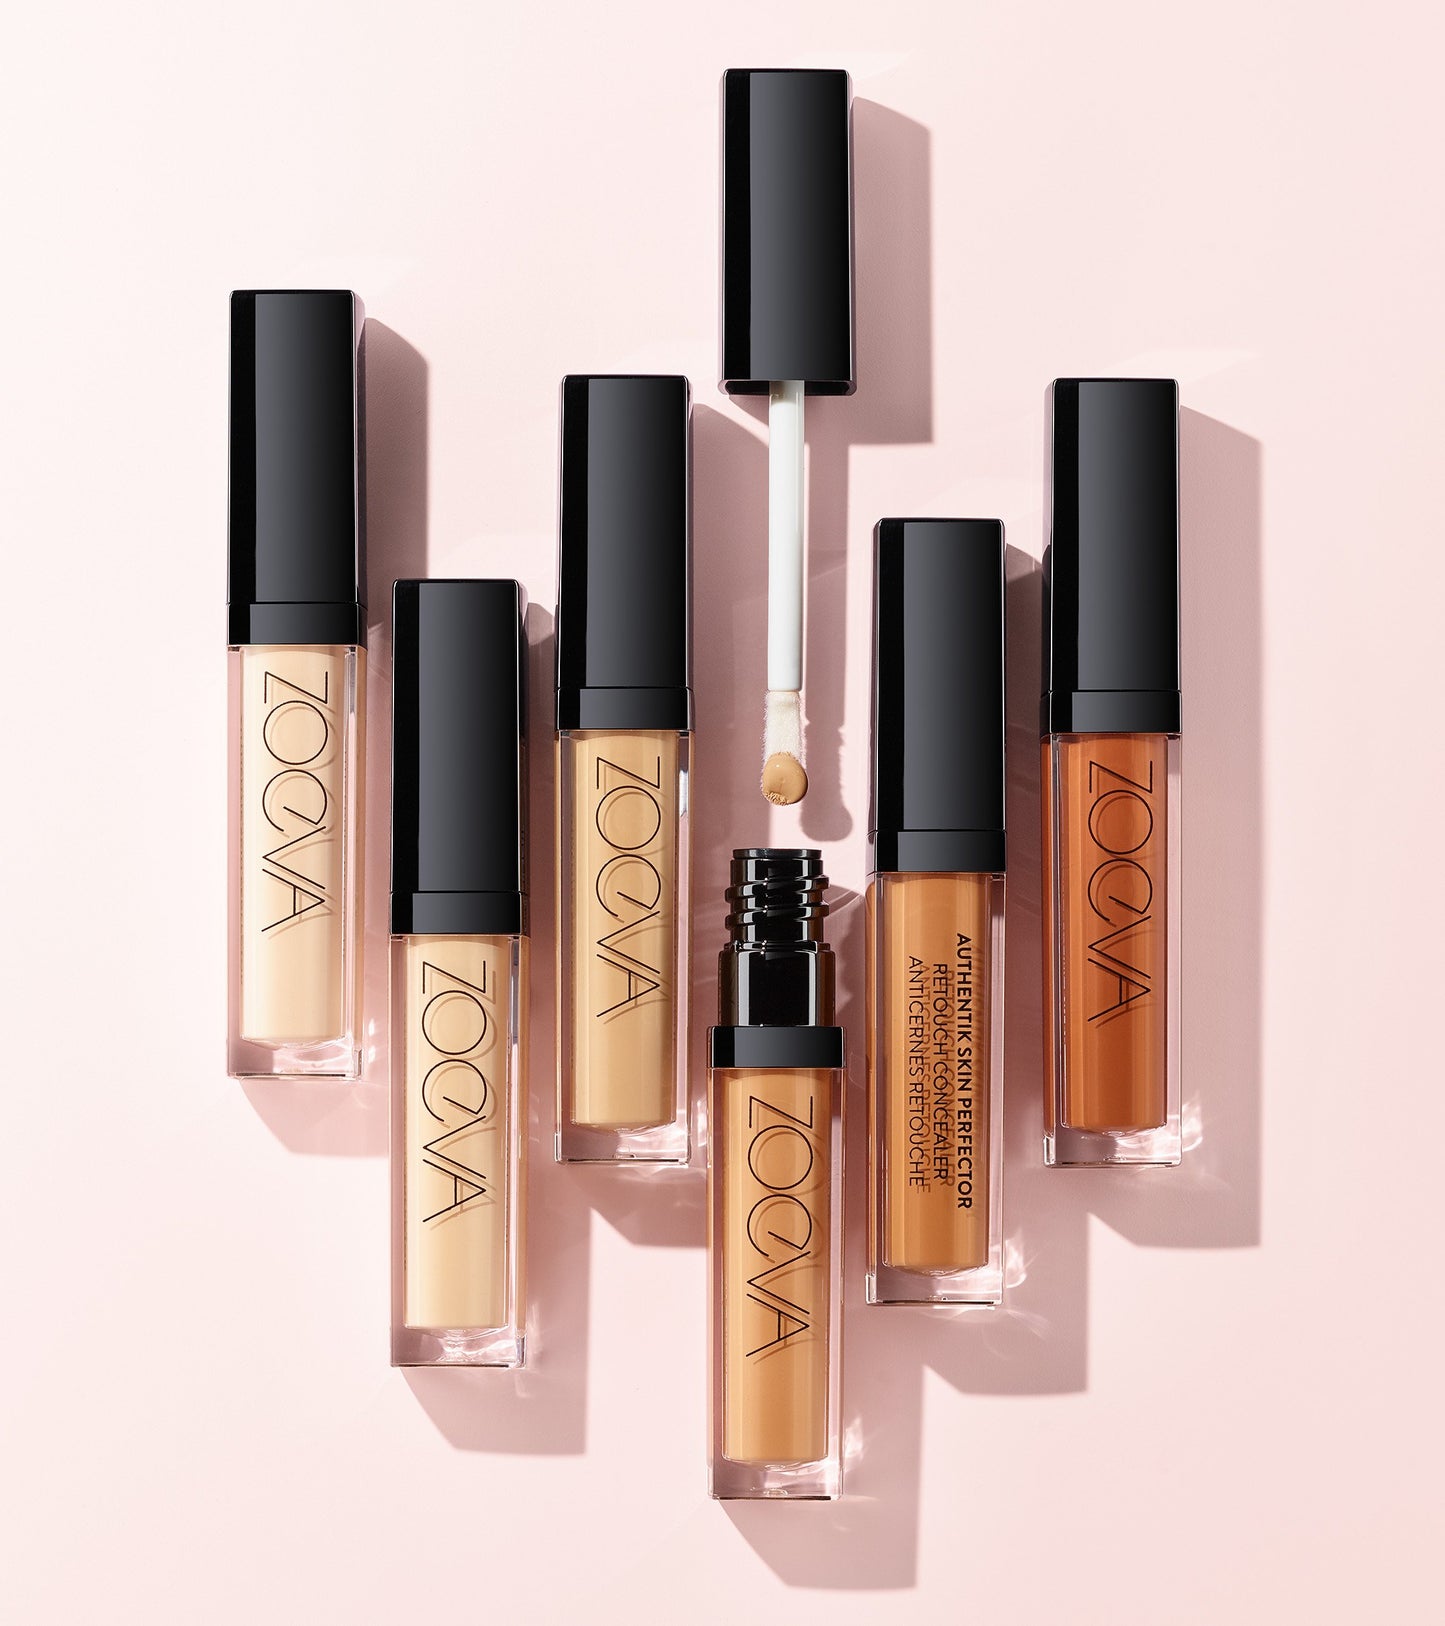 AUTHENTIK SKIN PERFECTOR CONCEALER (150 INCARNATE) Expanded Image 4